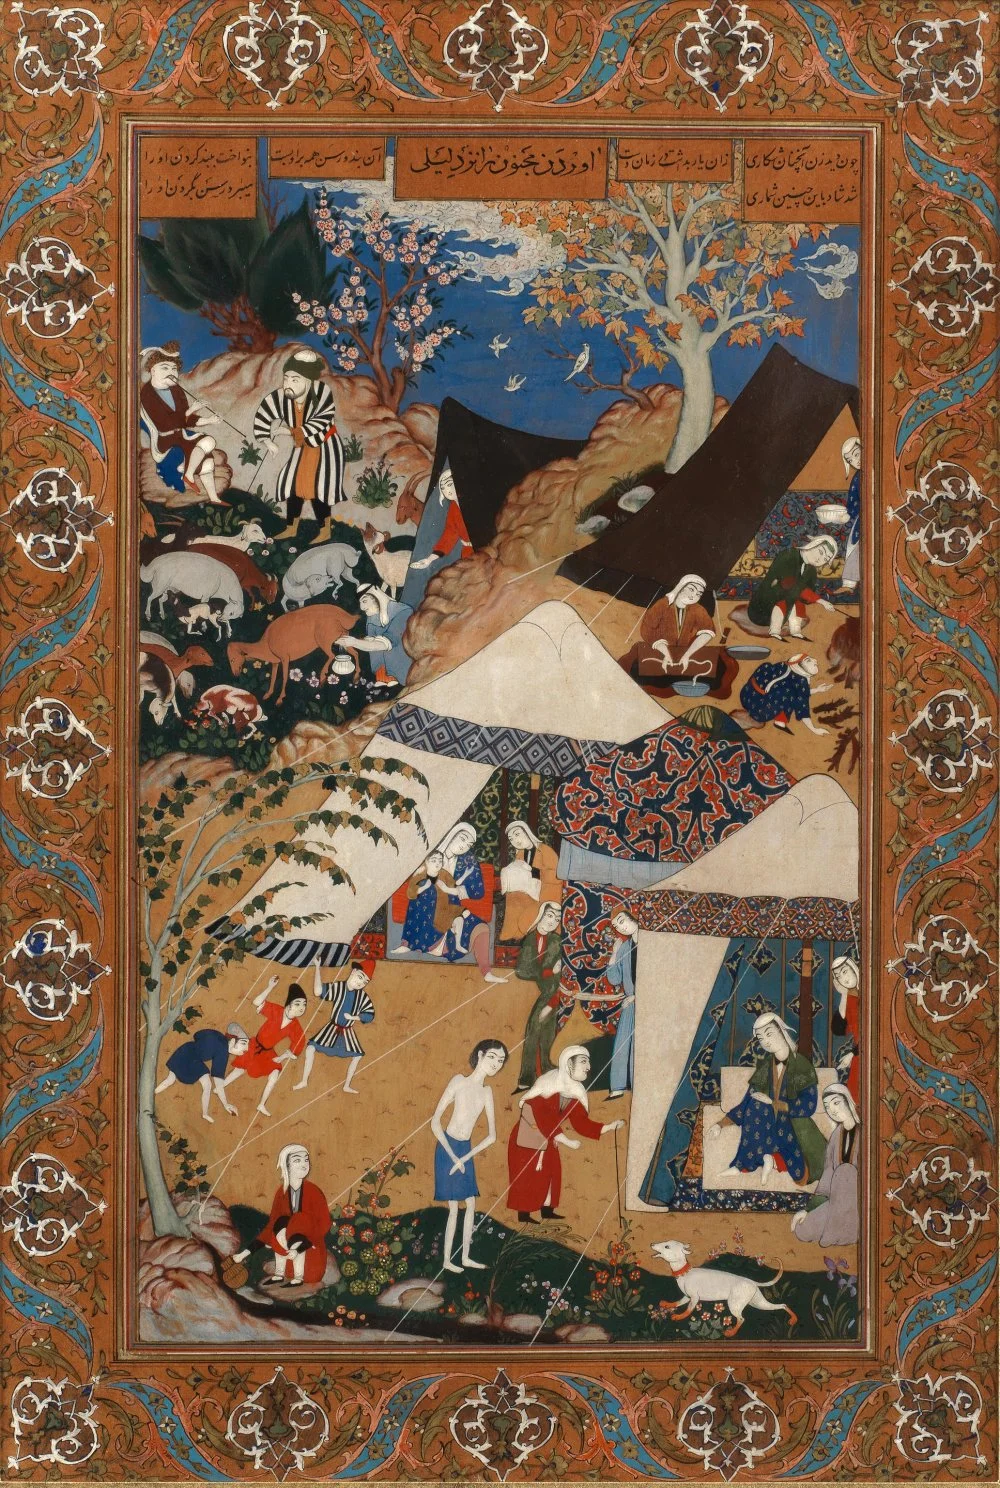 Majnun is brought in chains to Layla's tent. From Nizami's Layla Majnun. Painted by the 16th-century Safavid court artist Mir Sayyid Ali  (Or.2265, f. 157v)/British Library